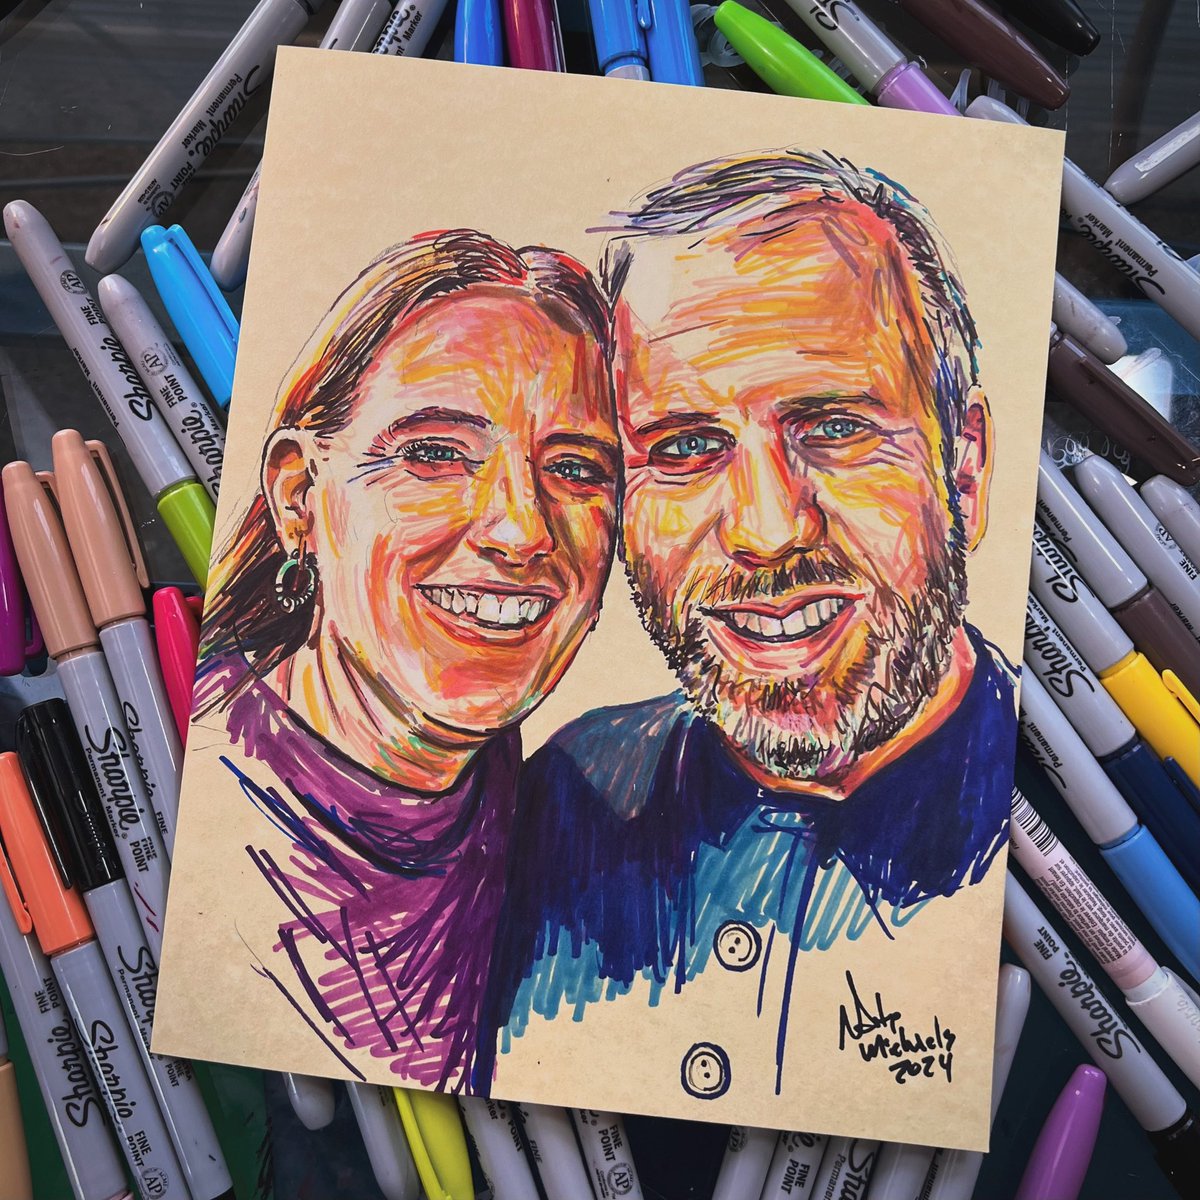 Drawn with Sharpies

I’m booking sketches for May (Mother’s Day is May 12th) - Send me a direct message if you’d to have a portrait created ✌️❤️🎨

#natemichaels #natemichaelsart #portraitartist #mothersday #mothersdaygift #giftsformom #art #drawing #sharpieart #artoftheday